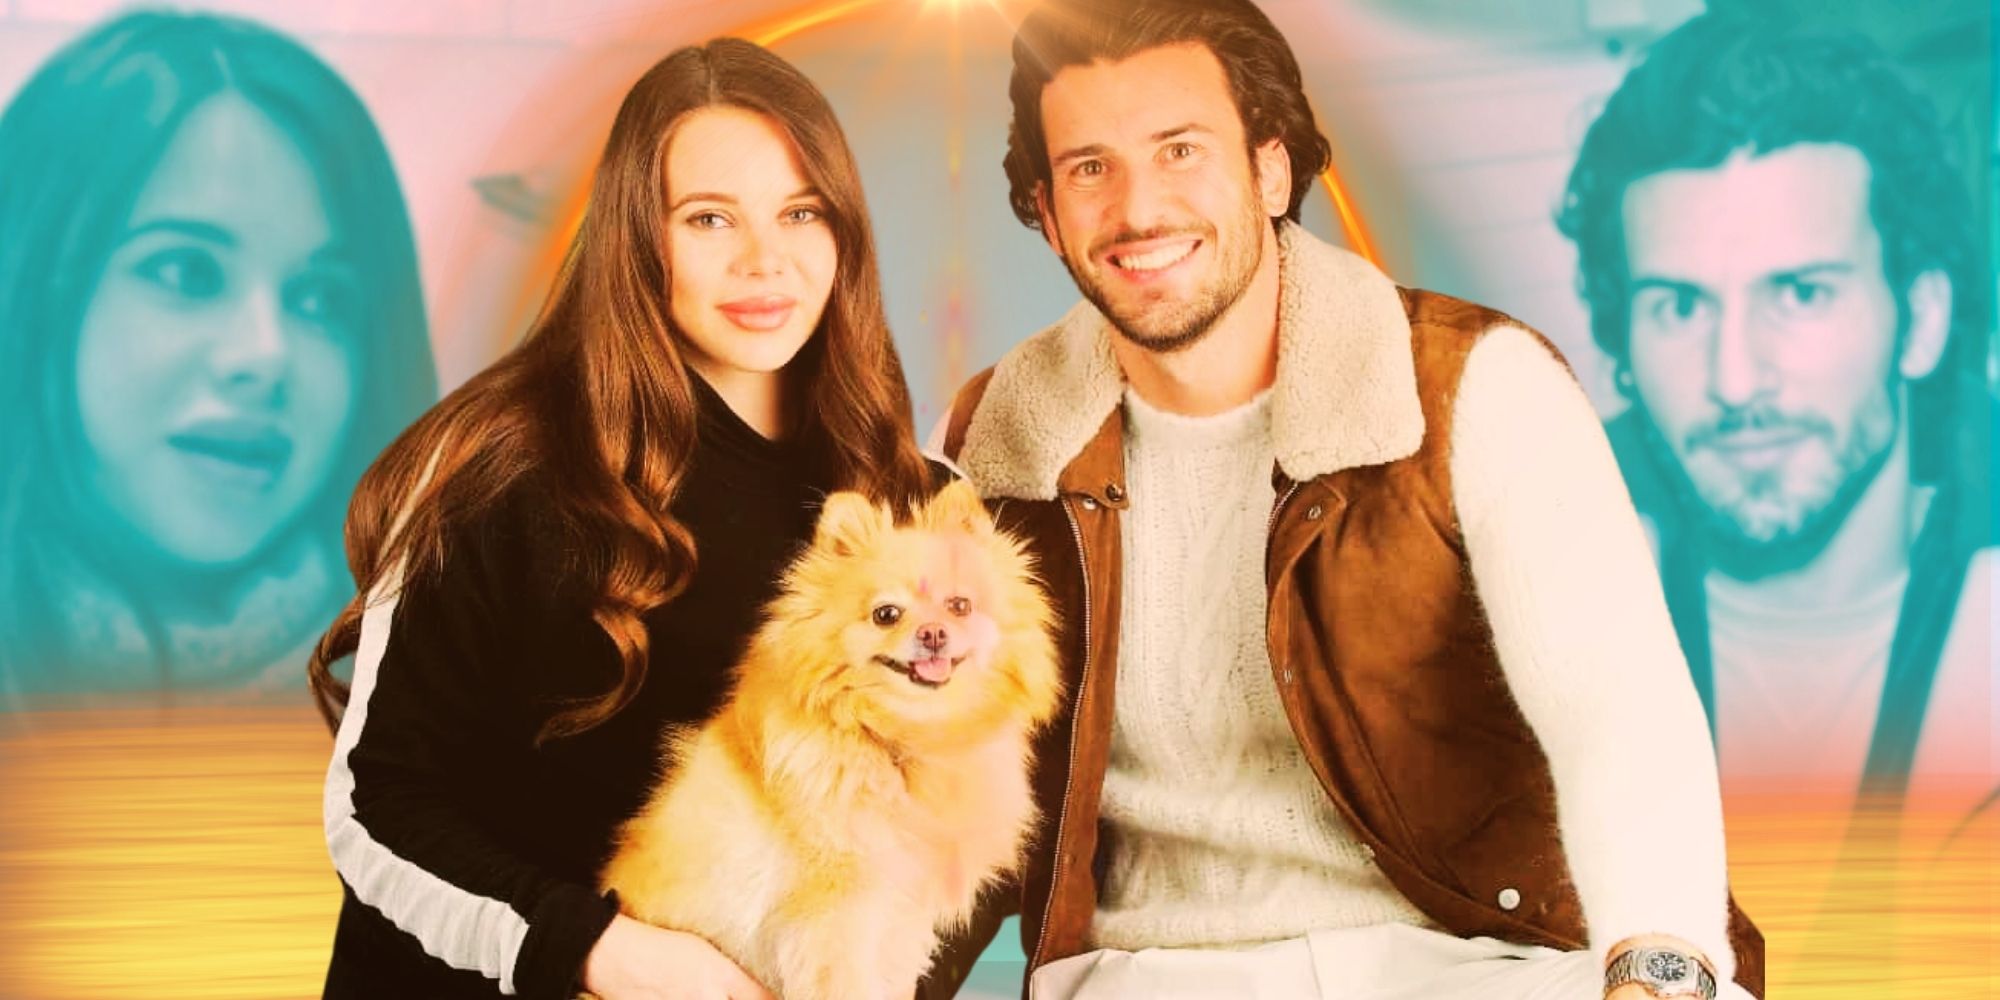 Luiza and Steve Gold holding their dog and smiling with themselves in the background